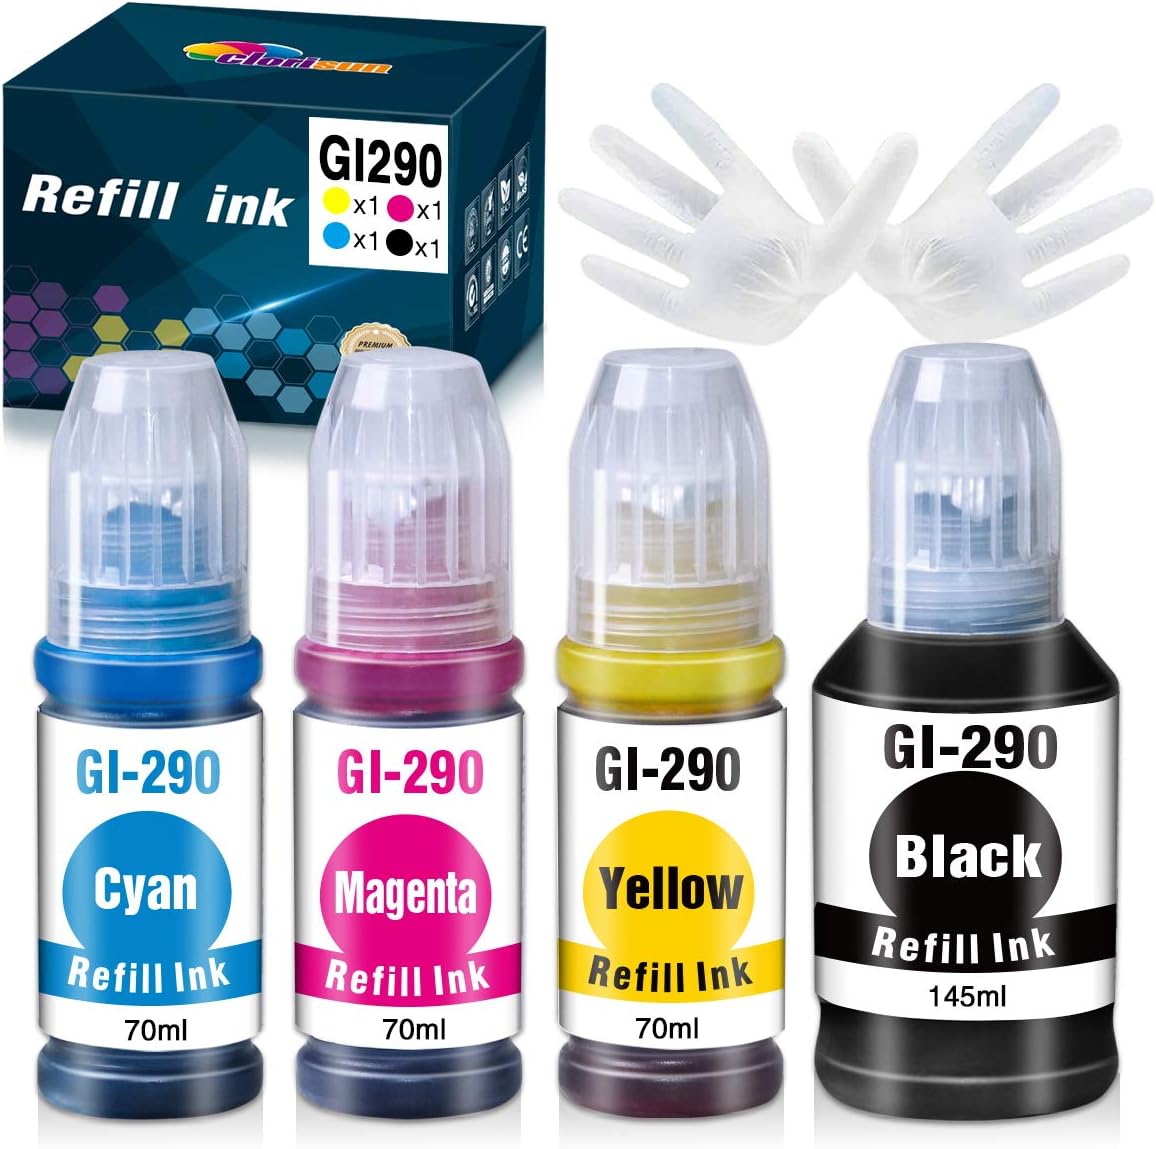 Compatible Canon 290 GI-290 Refill Ink Bottle (4-Pack Black Cyan Magenta Yellow) - Linford Office:Printer Ink & Toner Cartridge